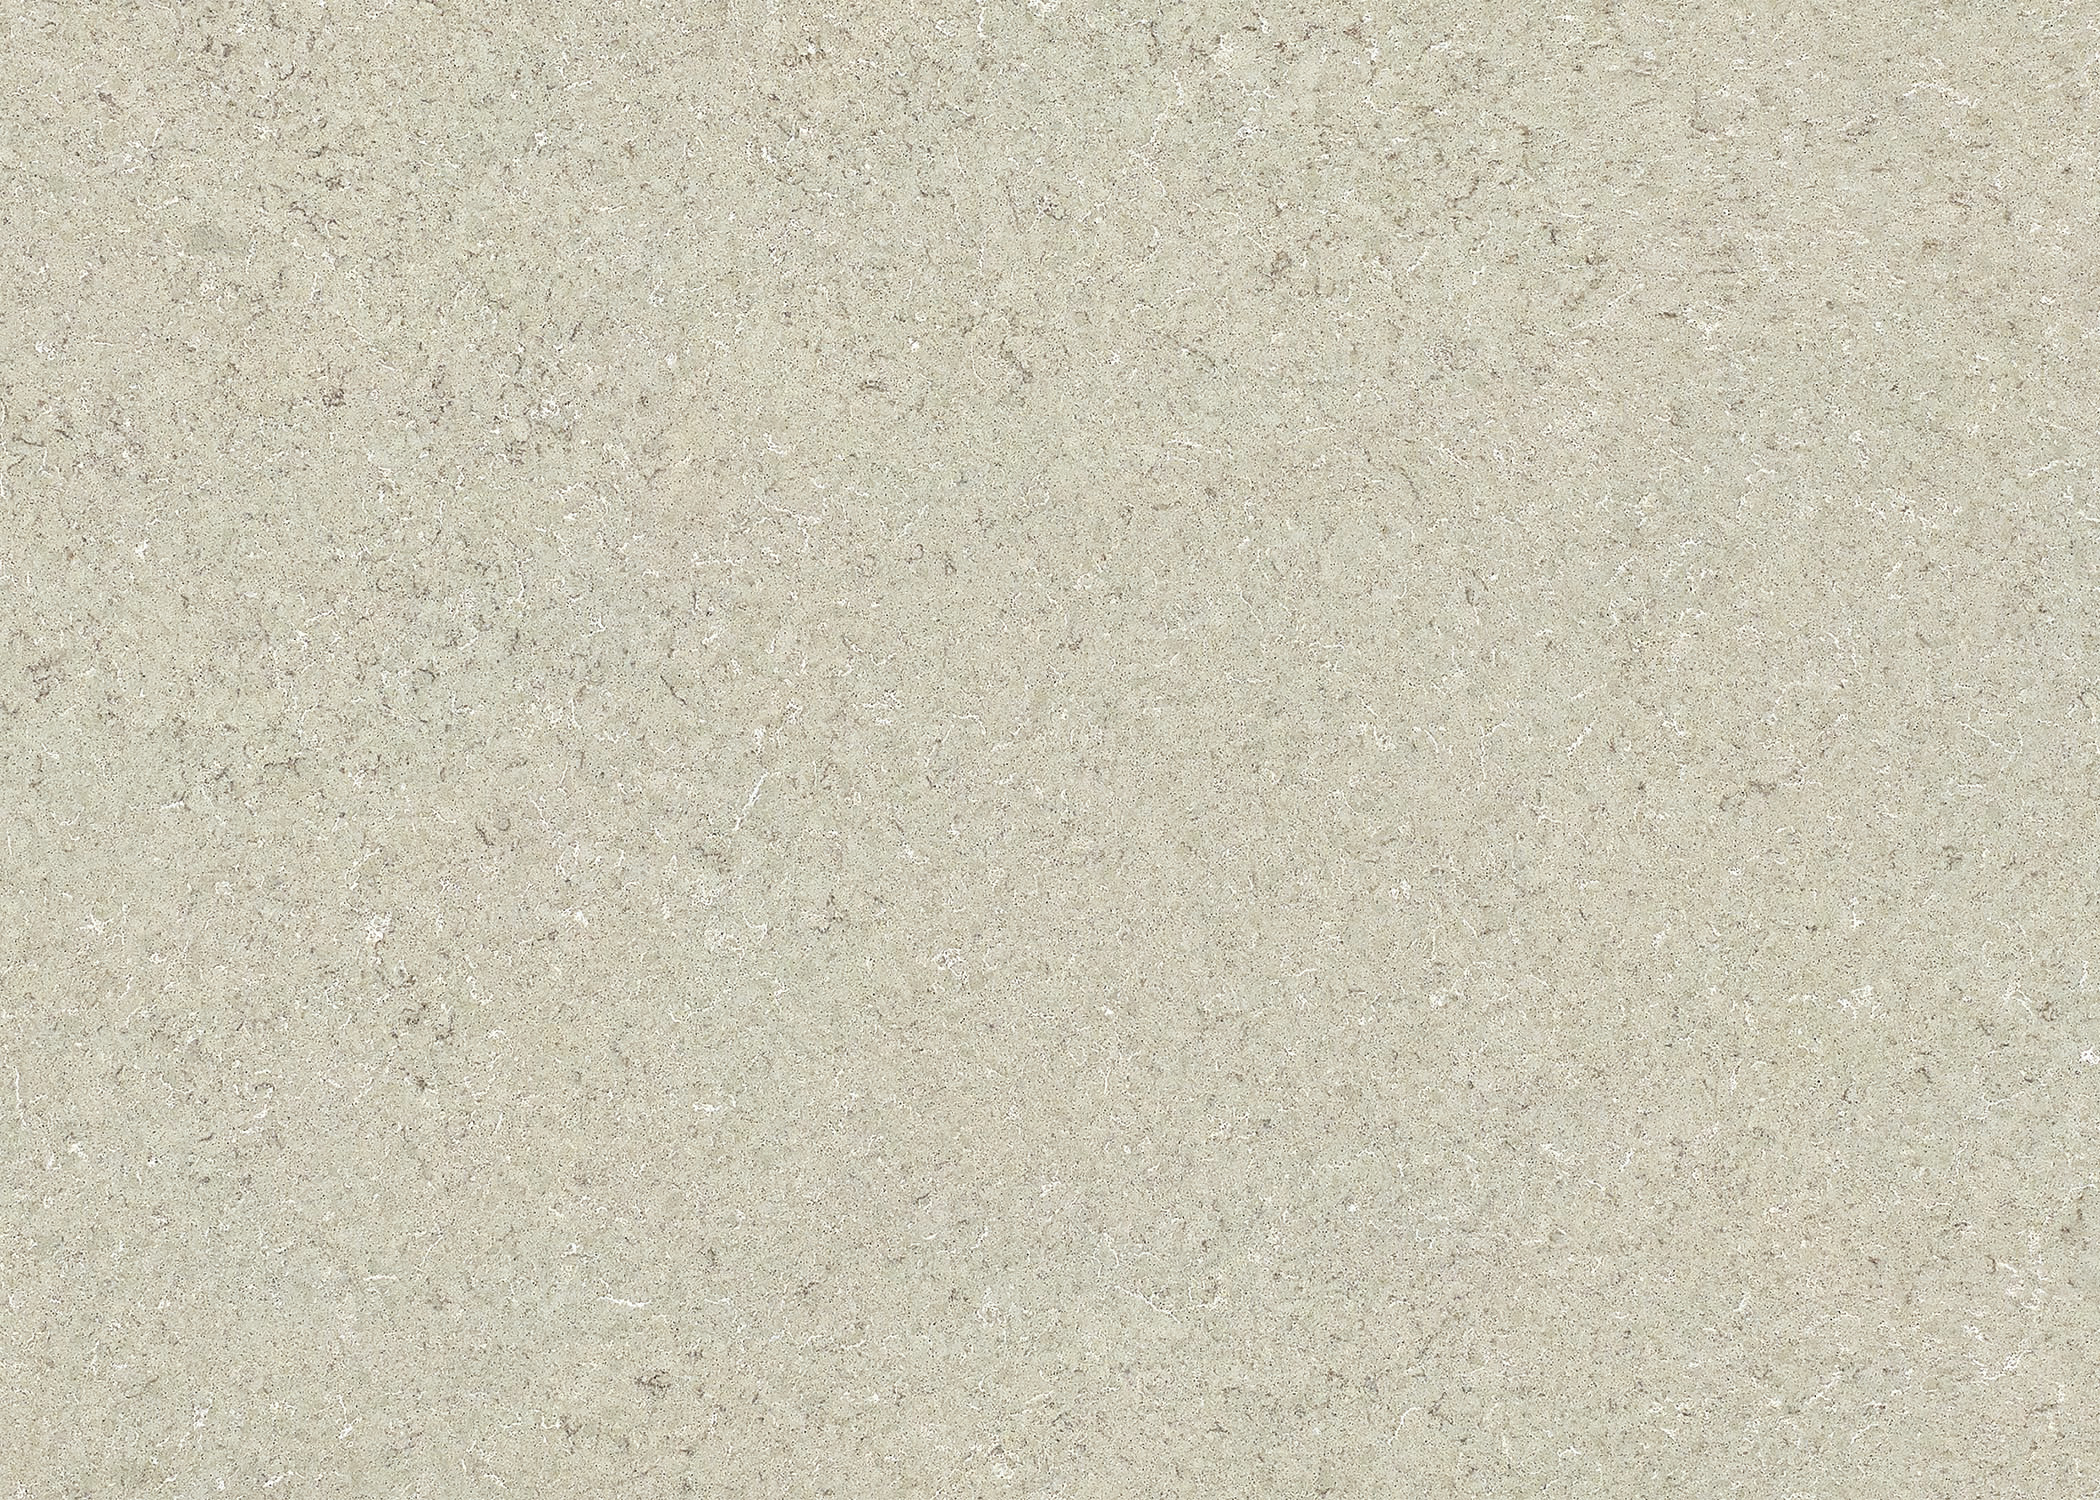 What Are The Advantages Of Quartz Stone Over Natural Stone?